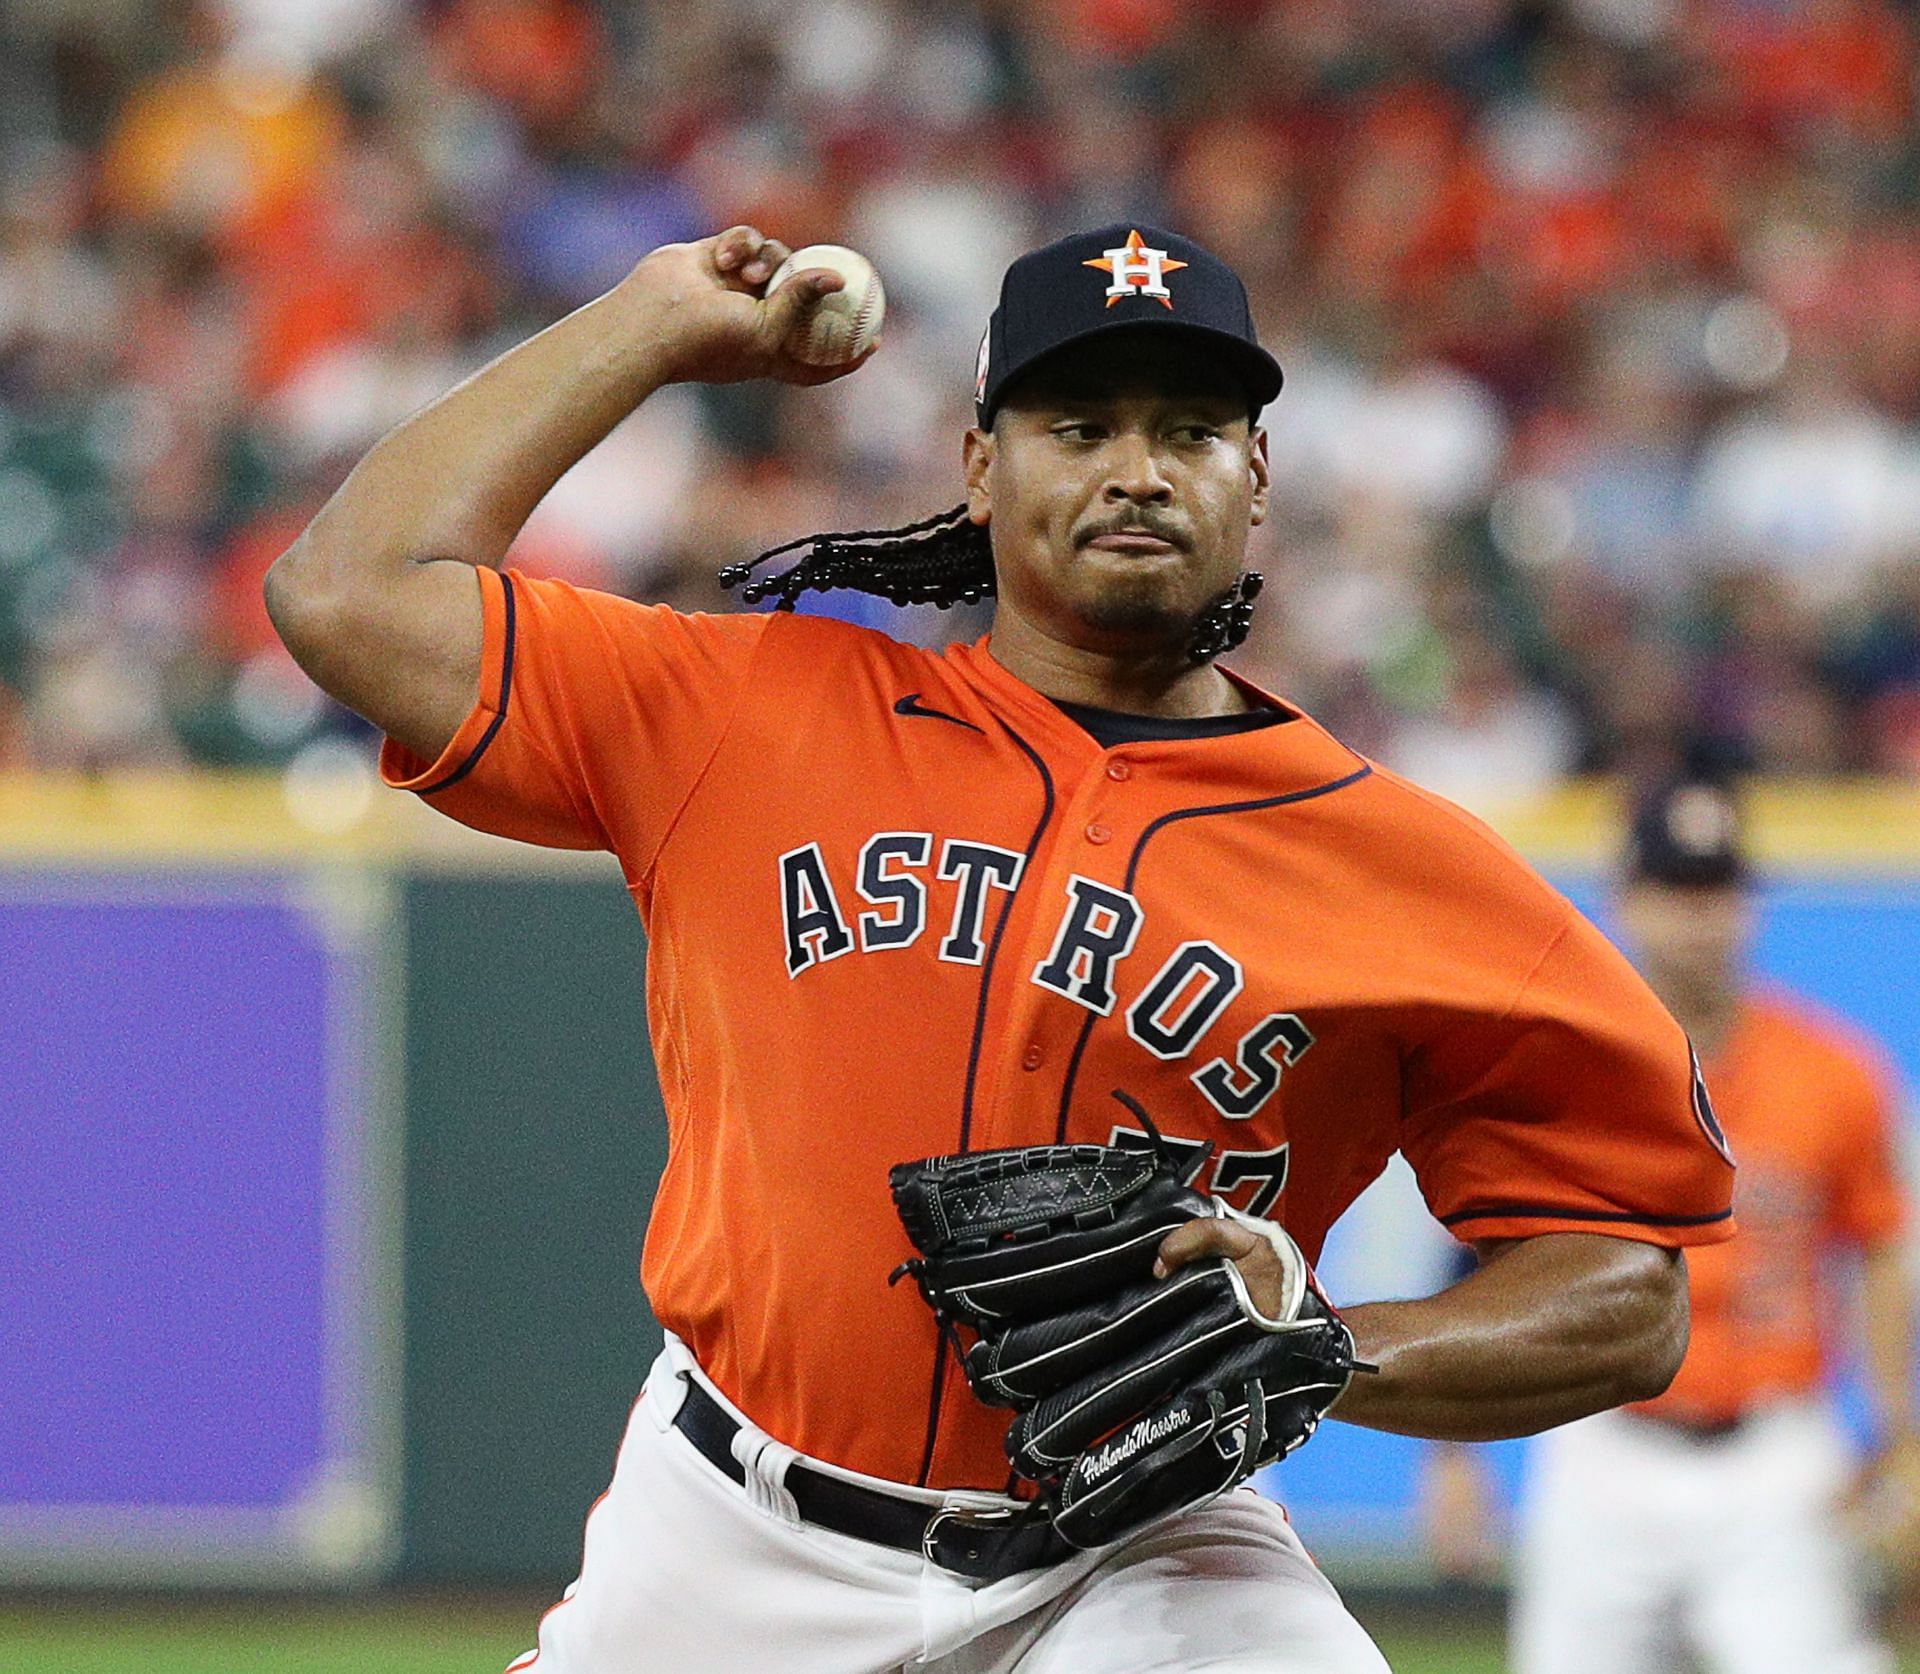 Luis Garcia makes slight adjustment to his delivery; Astros